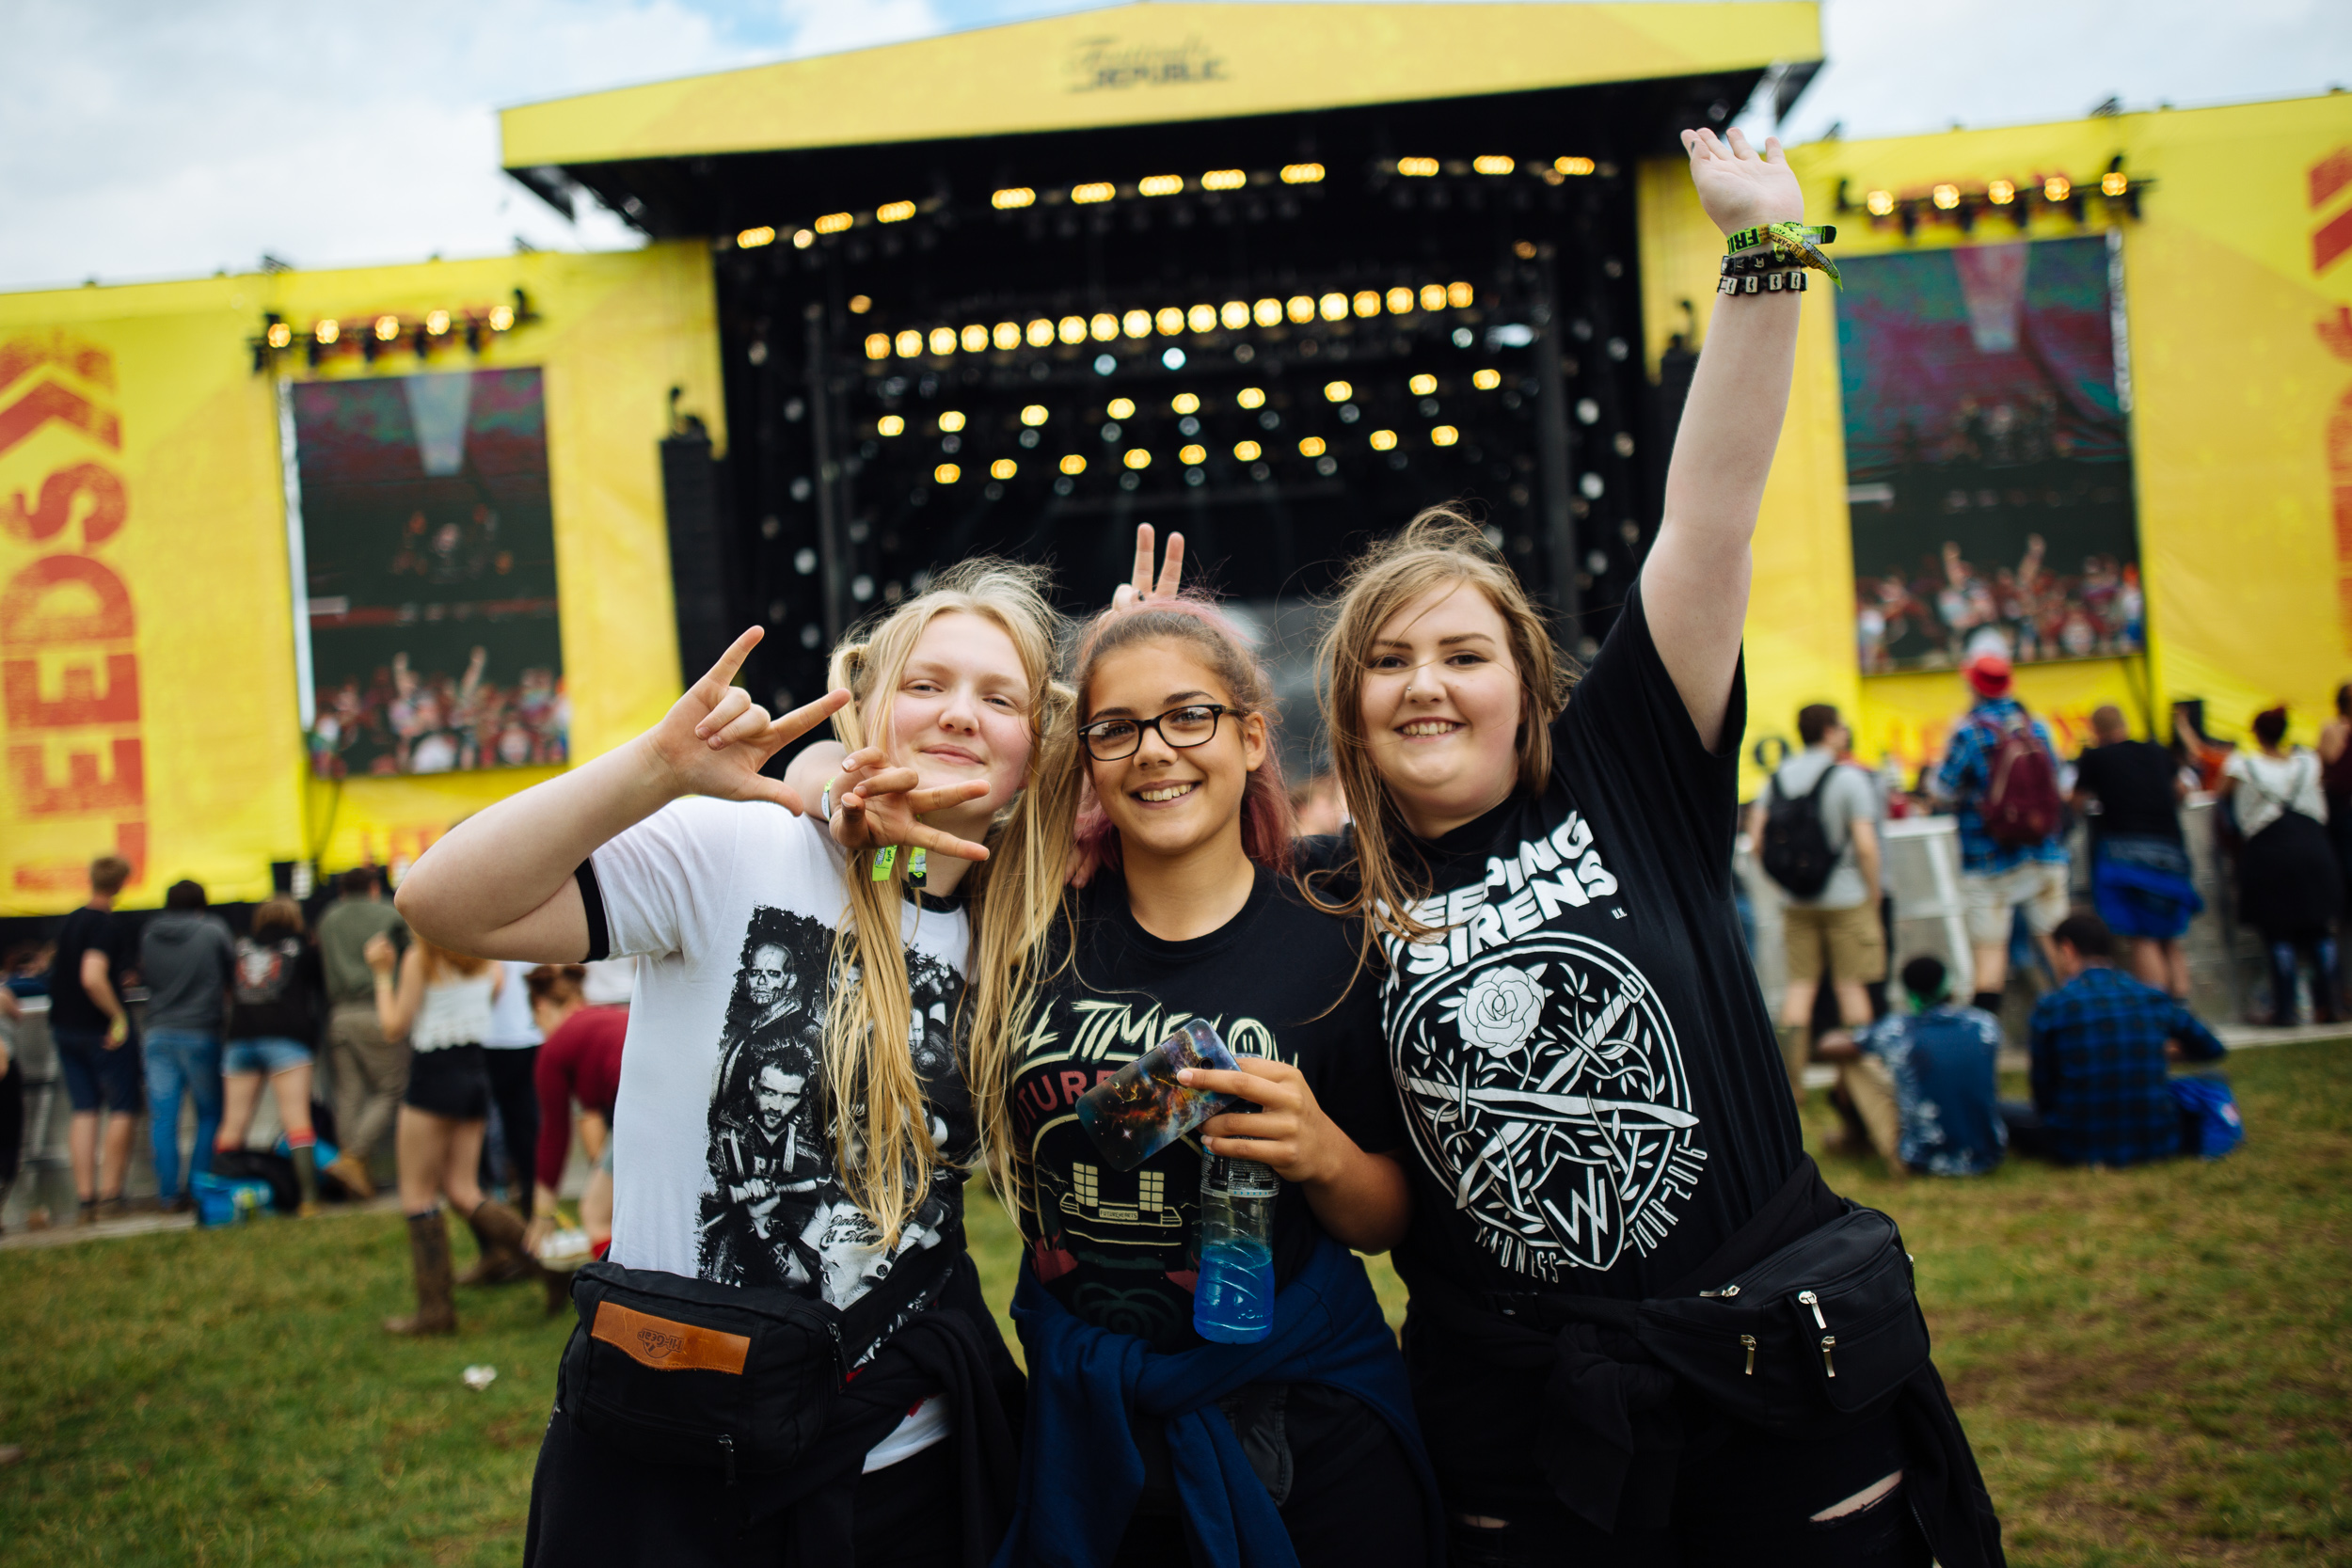 Awesome people at Leeds Festival by Adam Elmakias